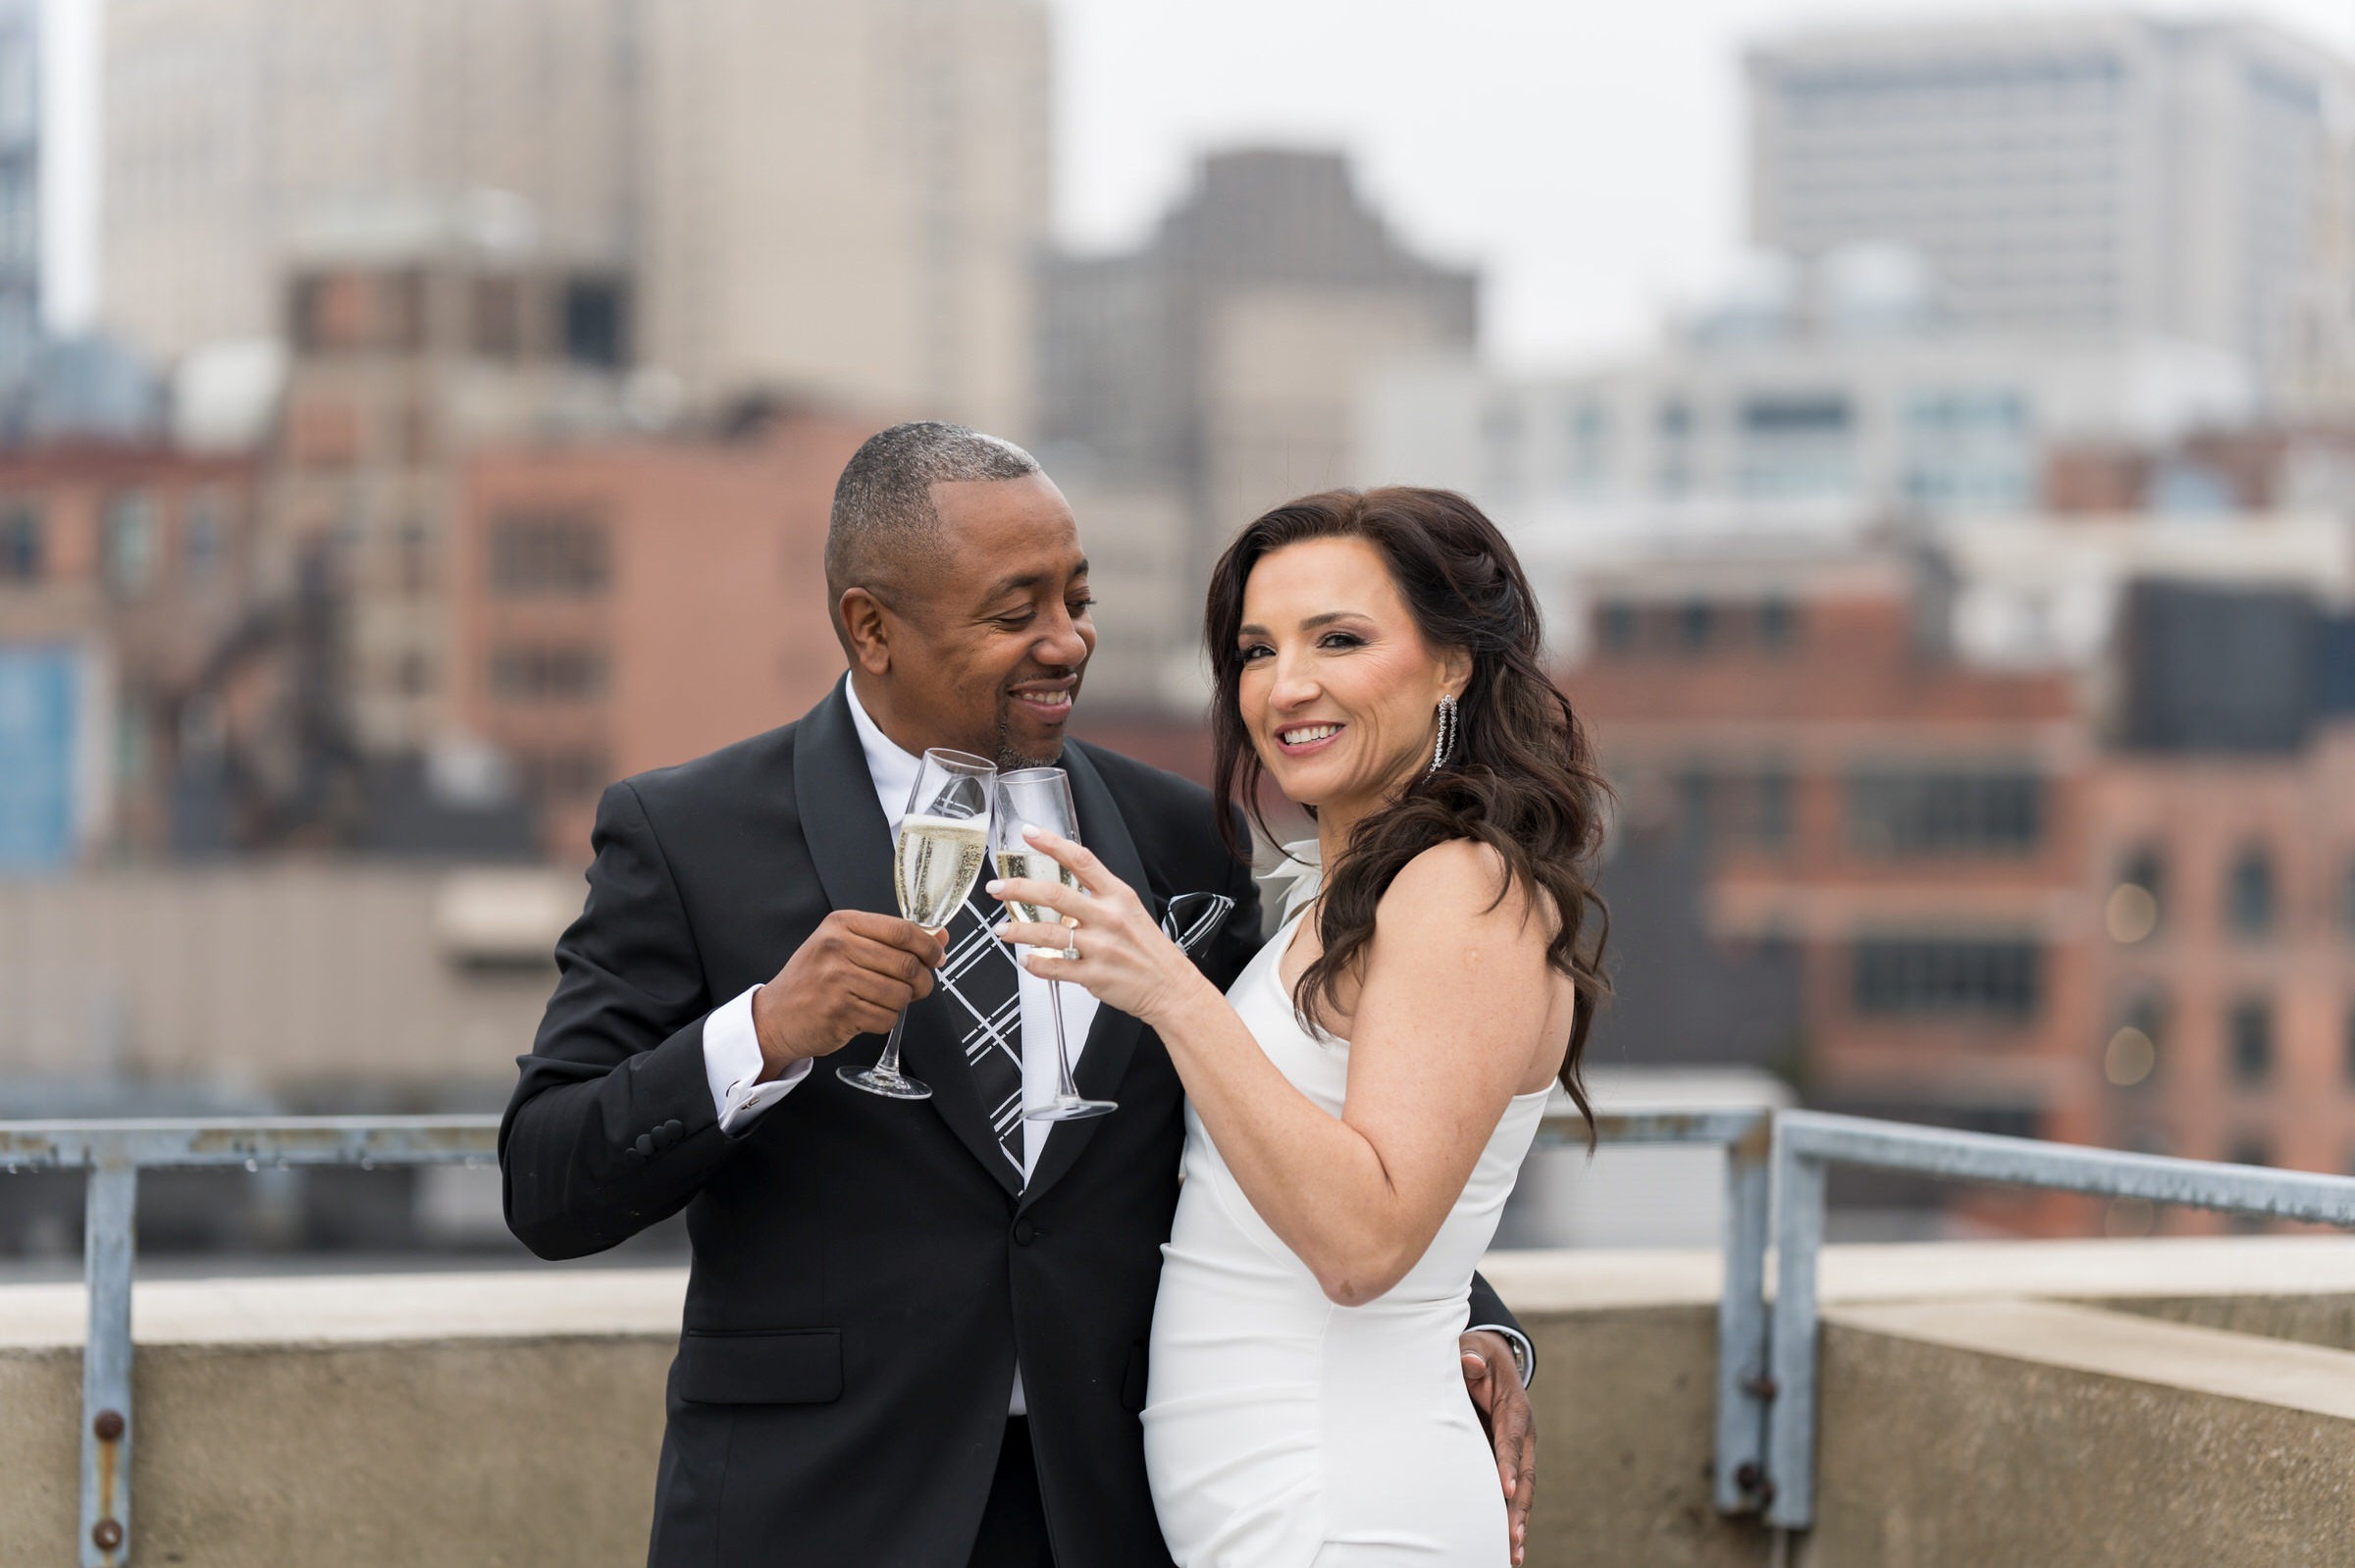 A bride and groom cheers champagne glasses with a city skyline behind them in Detroit on their wedding day.  